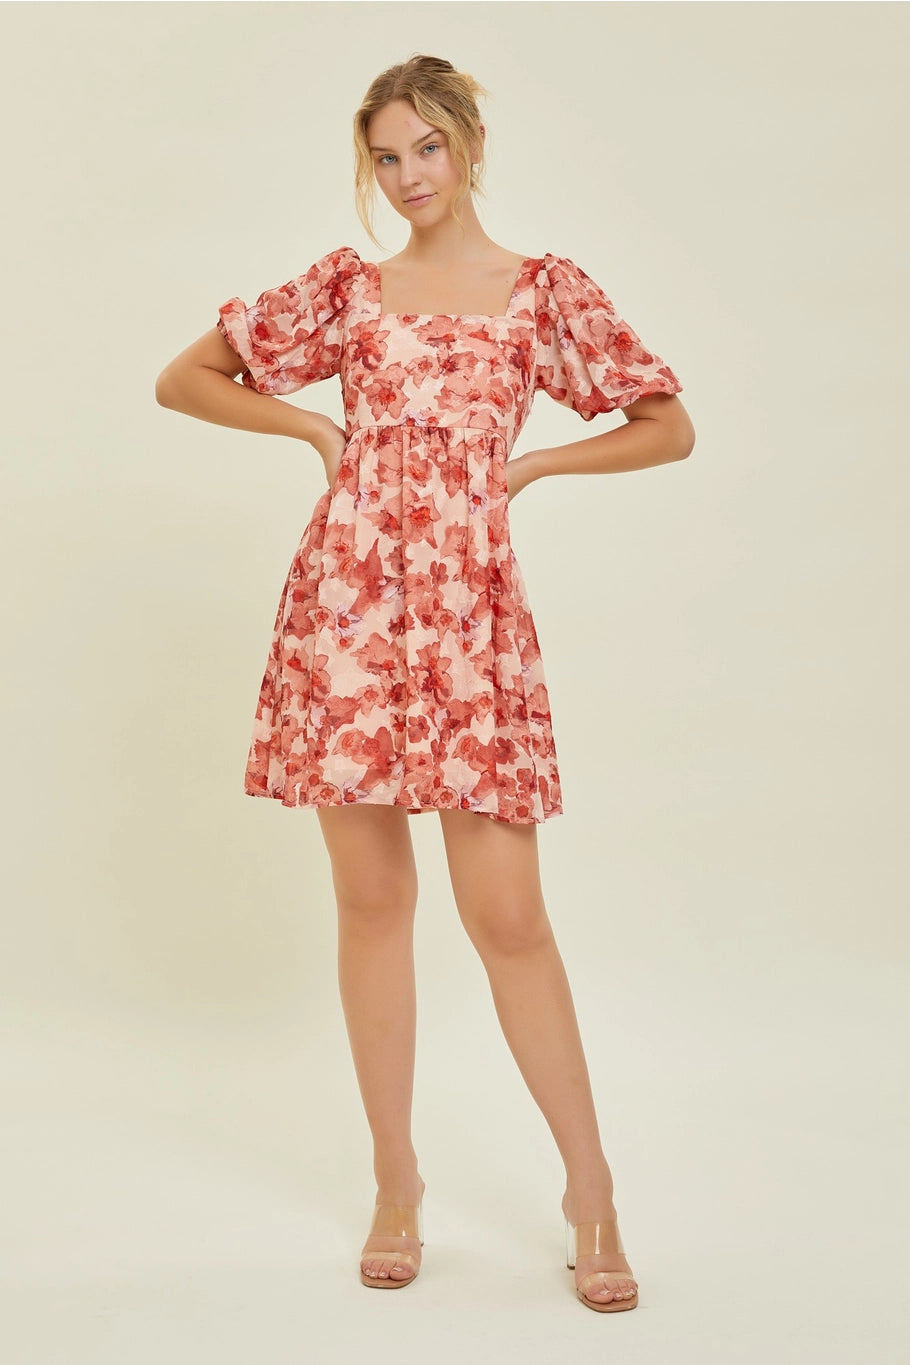 Floral Babydoll Dress in Red/Pink